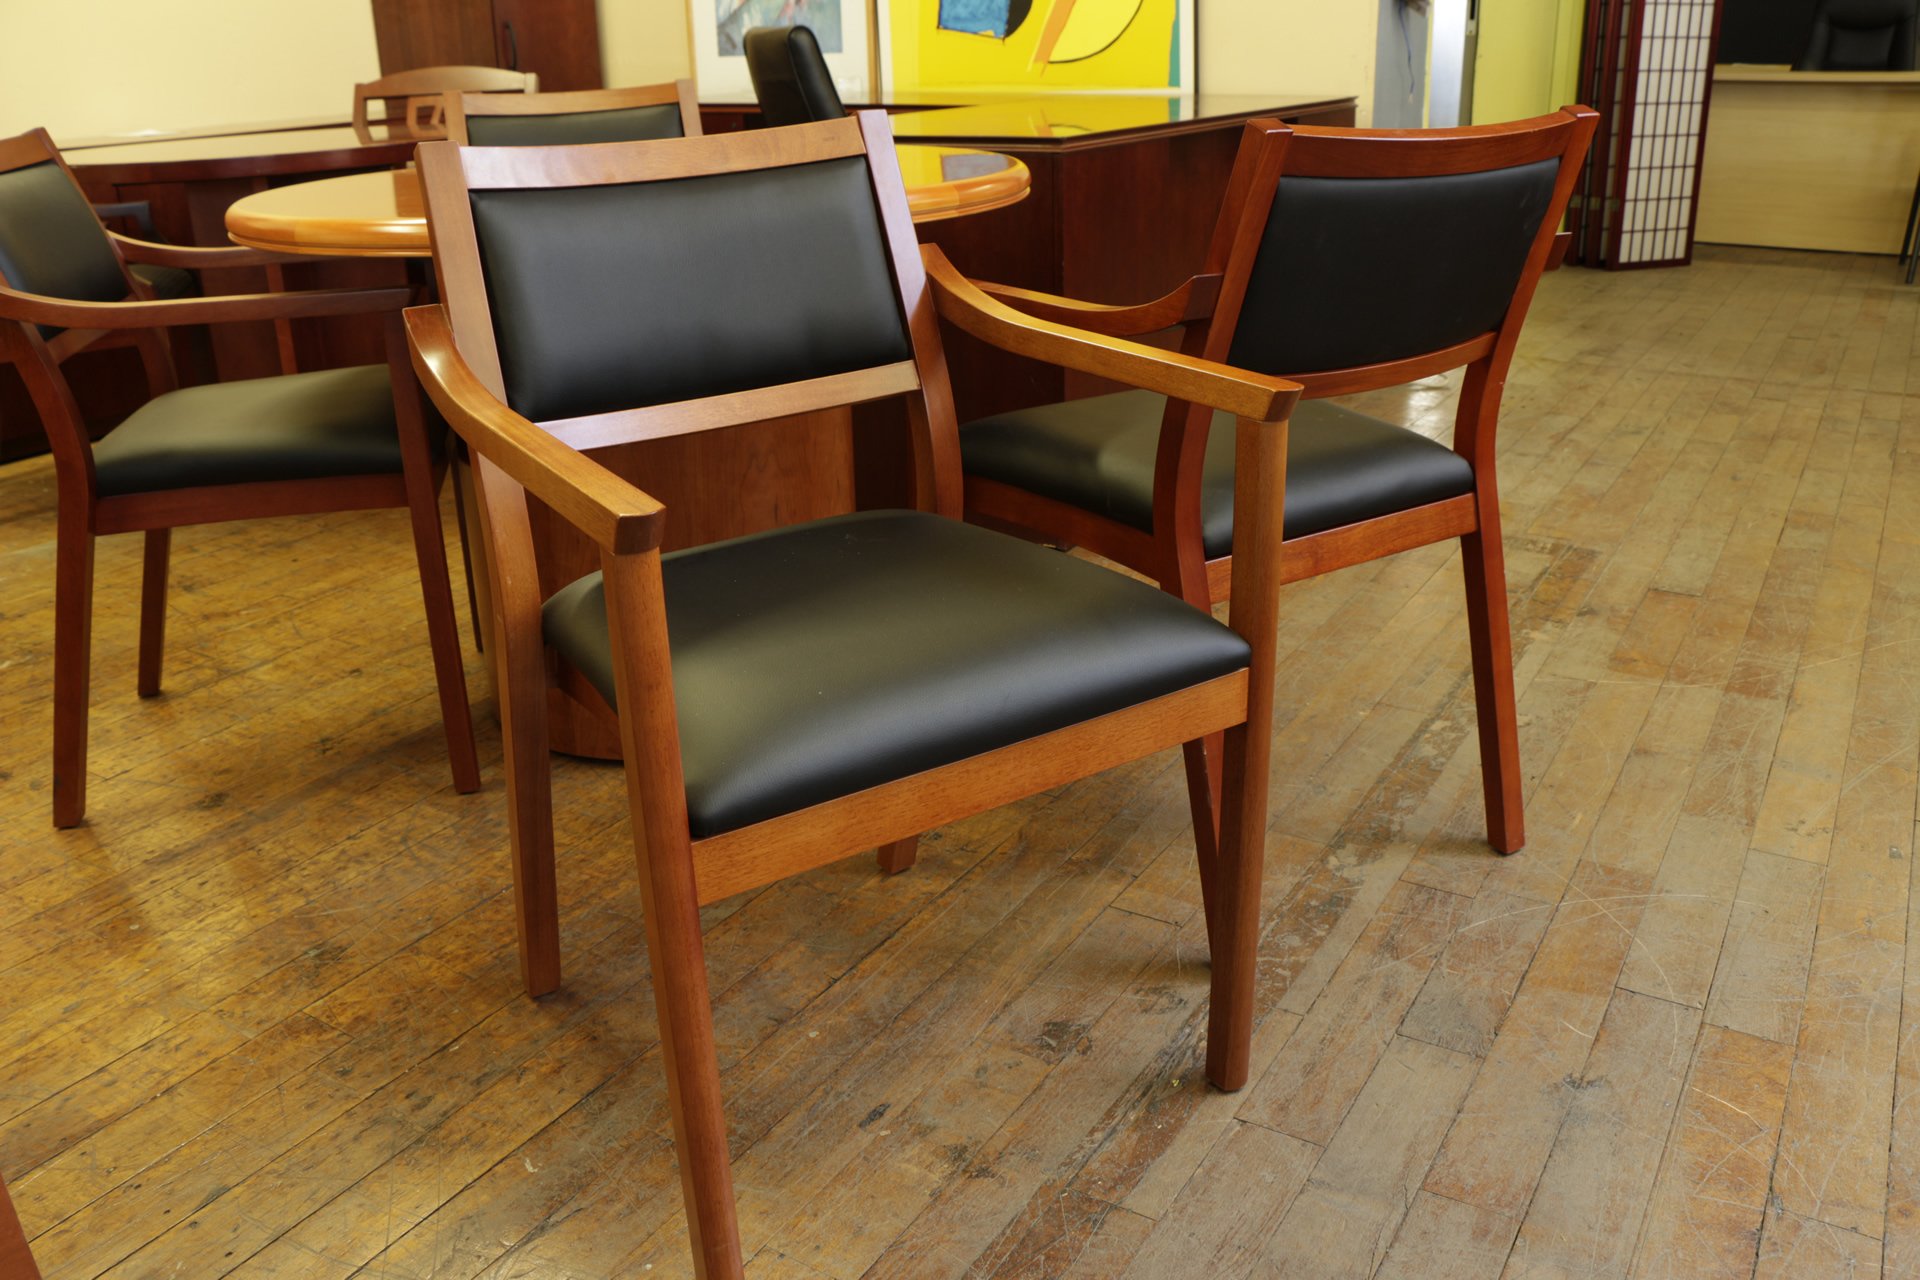 Cherry Frame SIde Chairs with Black Leatherette Seat